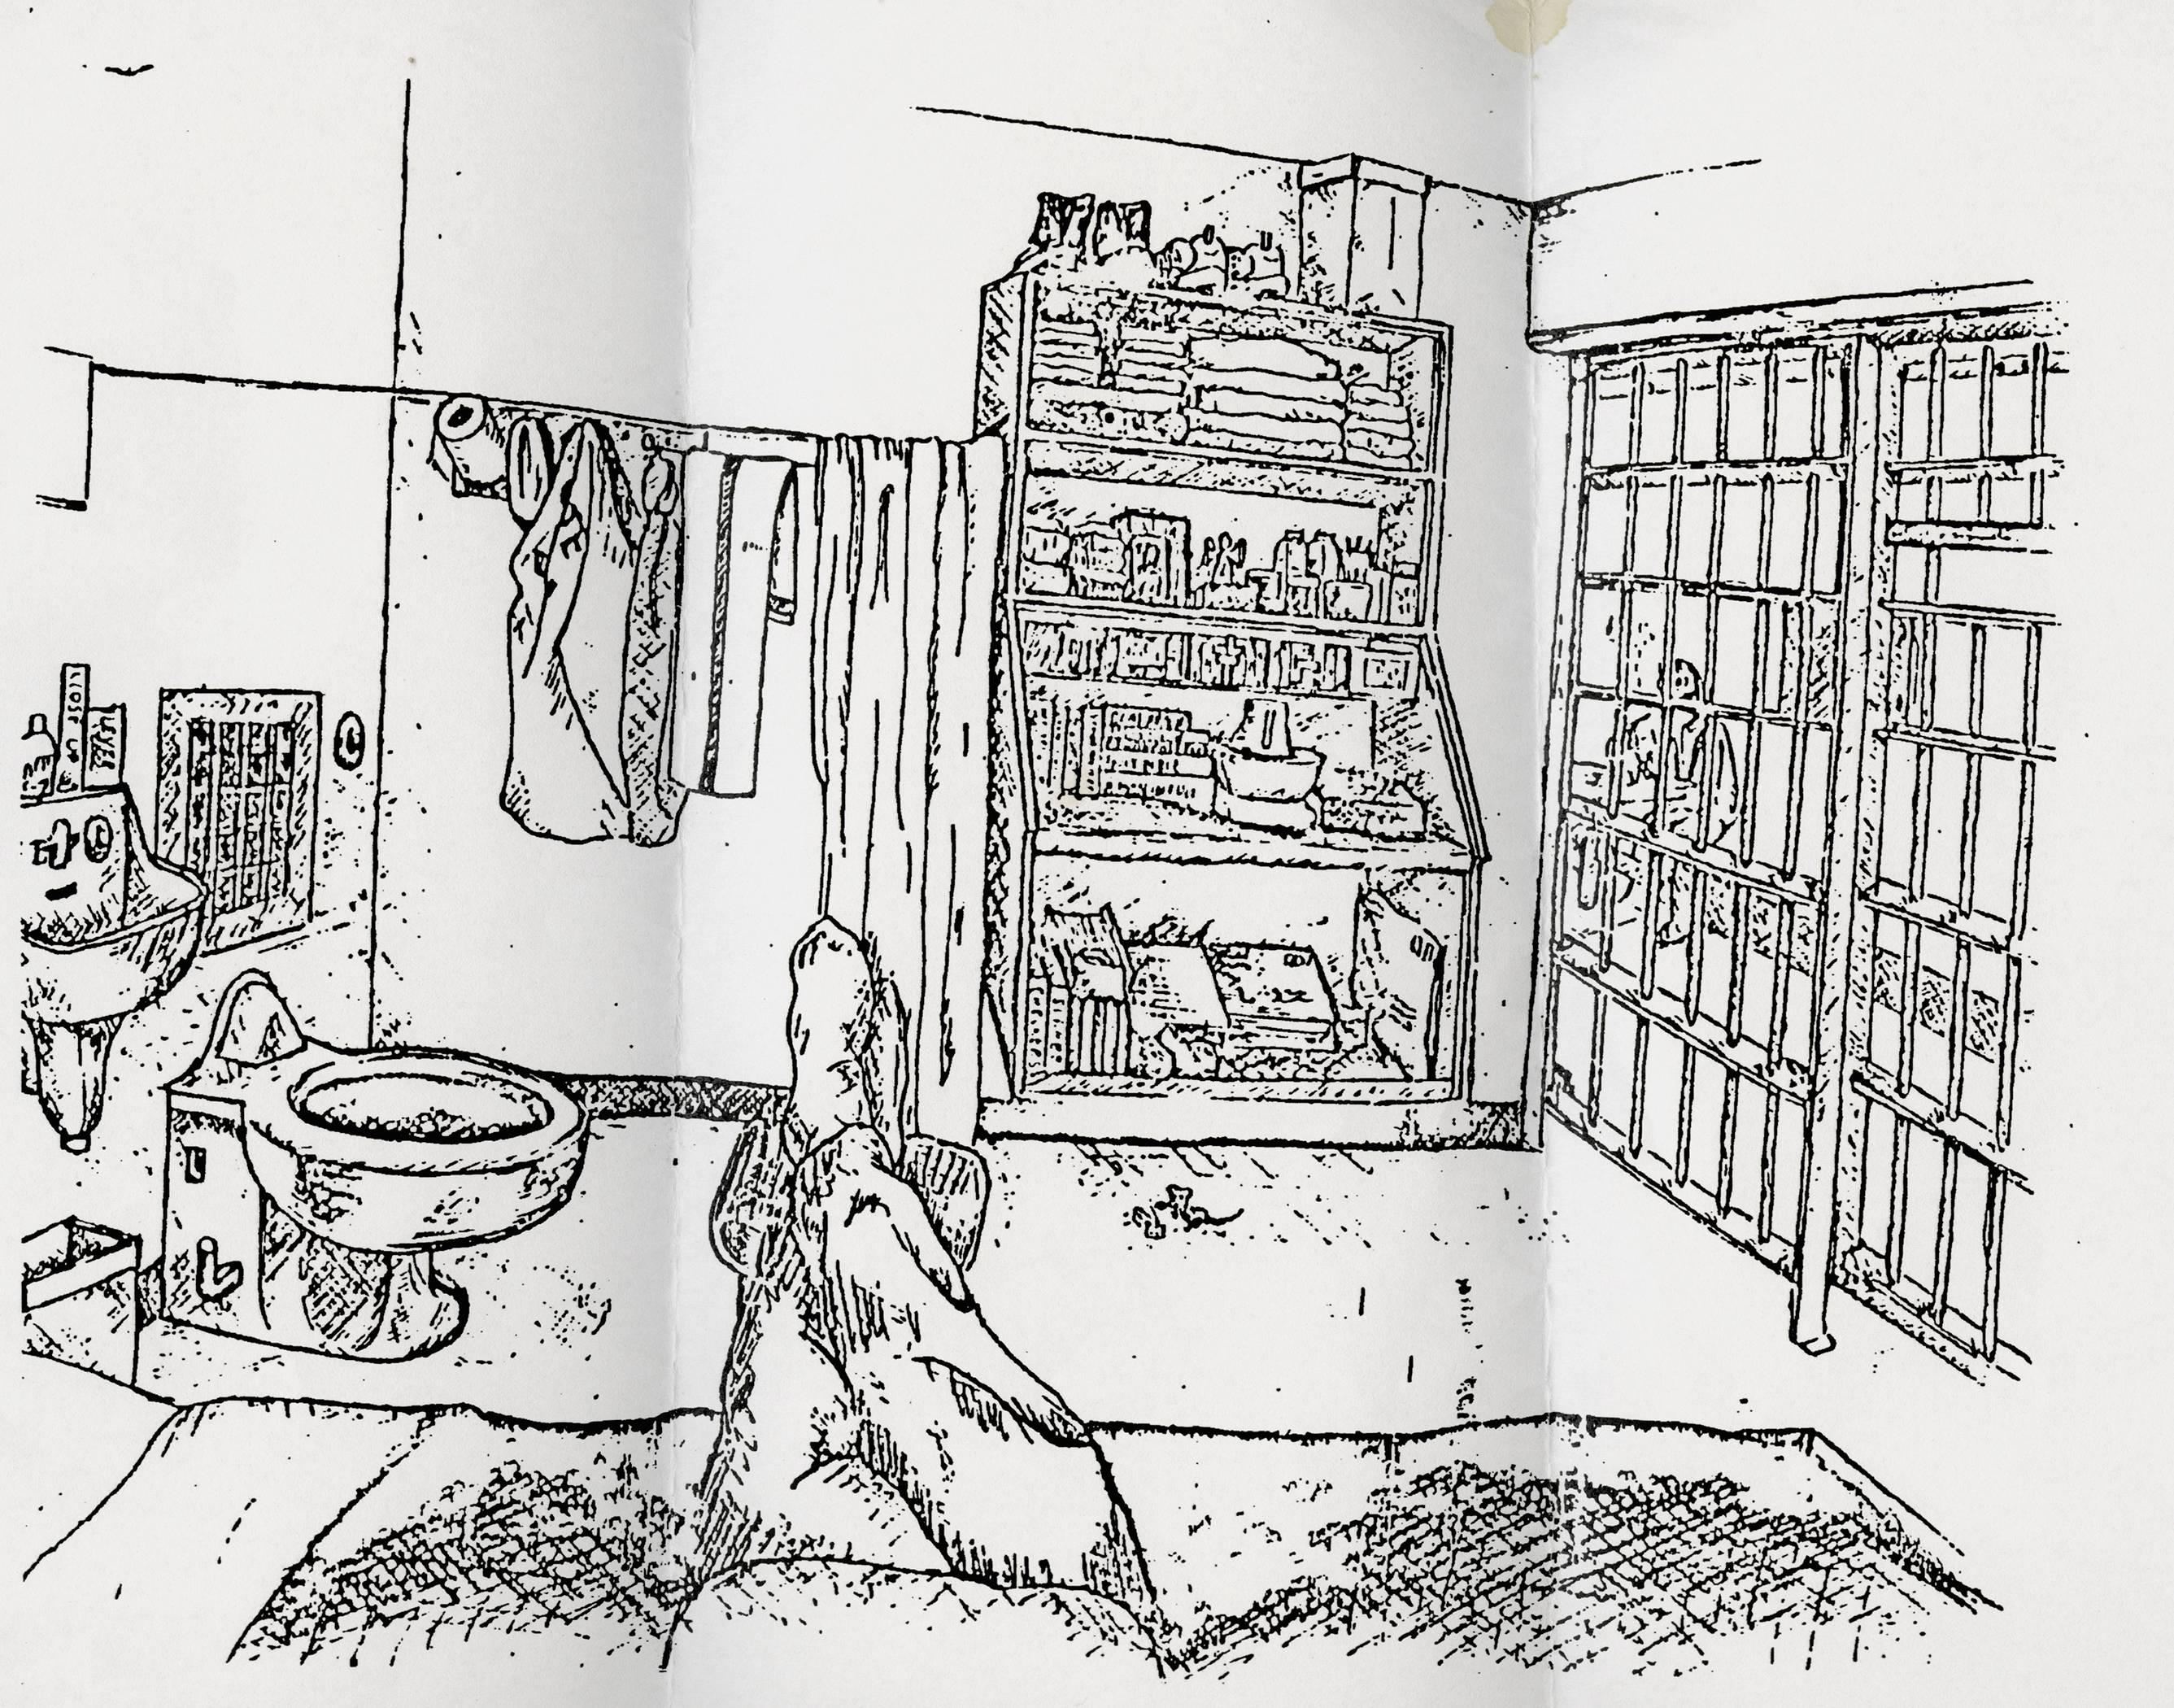 Amy Elkins Portrait Photograph - Sketch of a death row cell interior